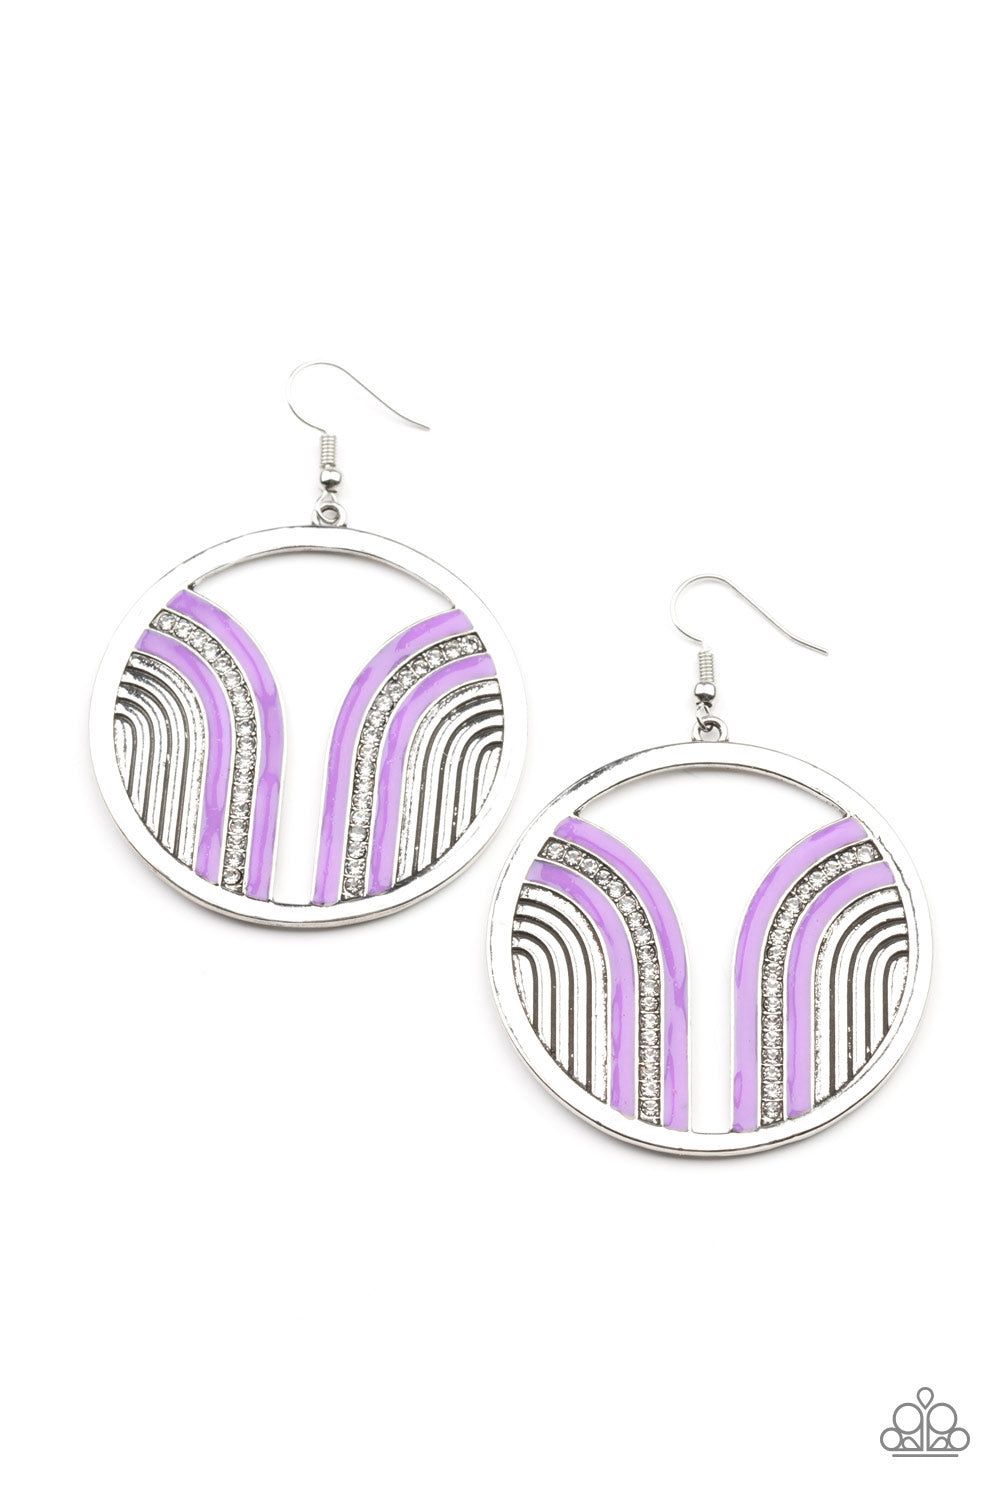 Infused with a glittery row of white rhinestones, shiny purple arcs curve into juxtaposed frames inside a classic silver hoop, creating a colorful art deco inspired centerpiece.